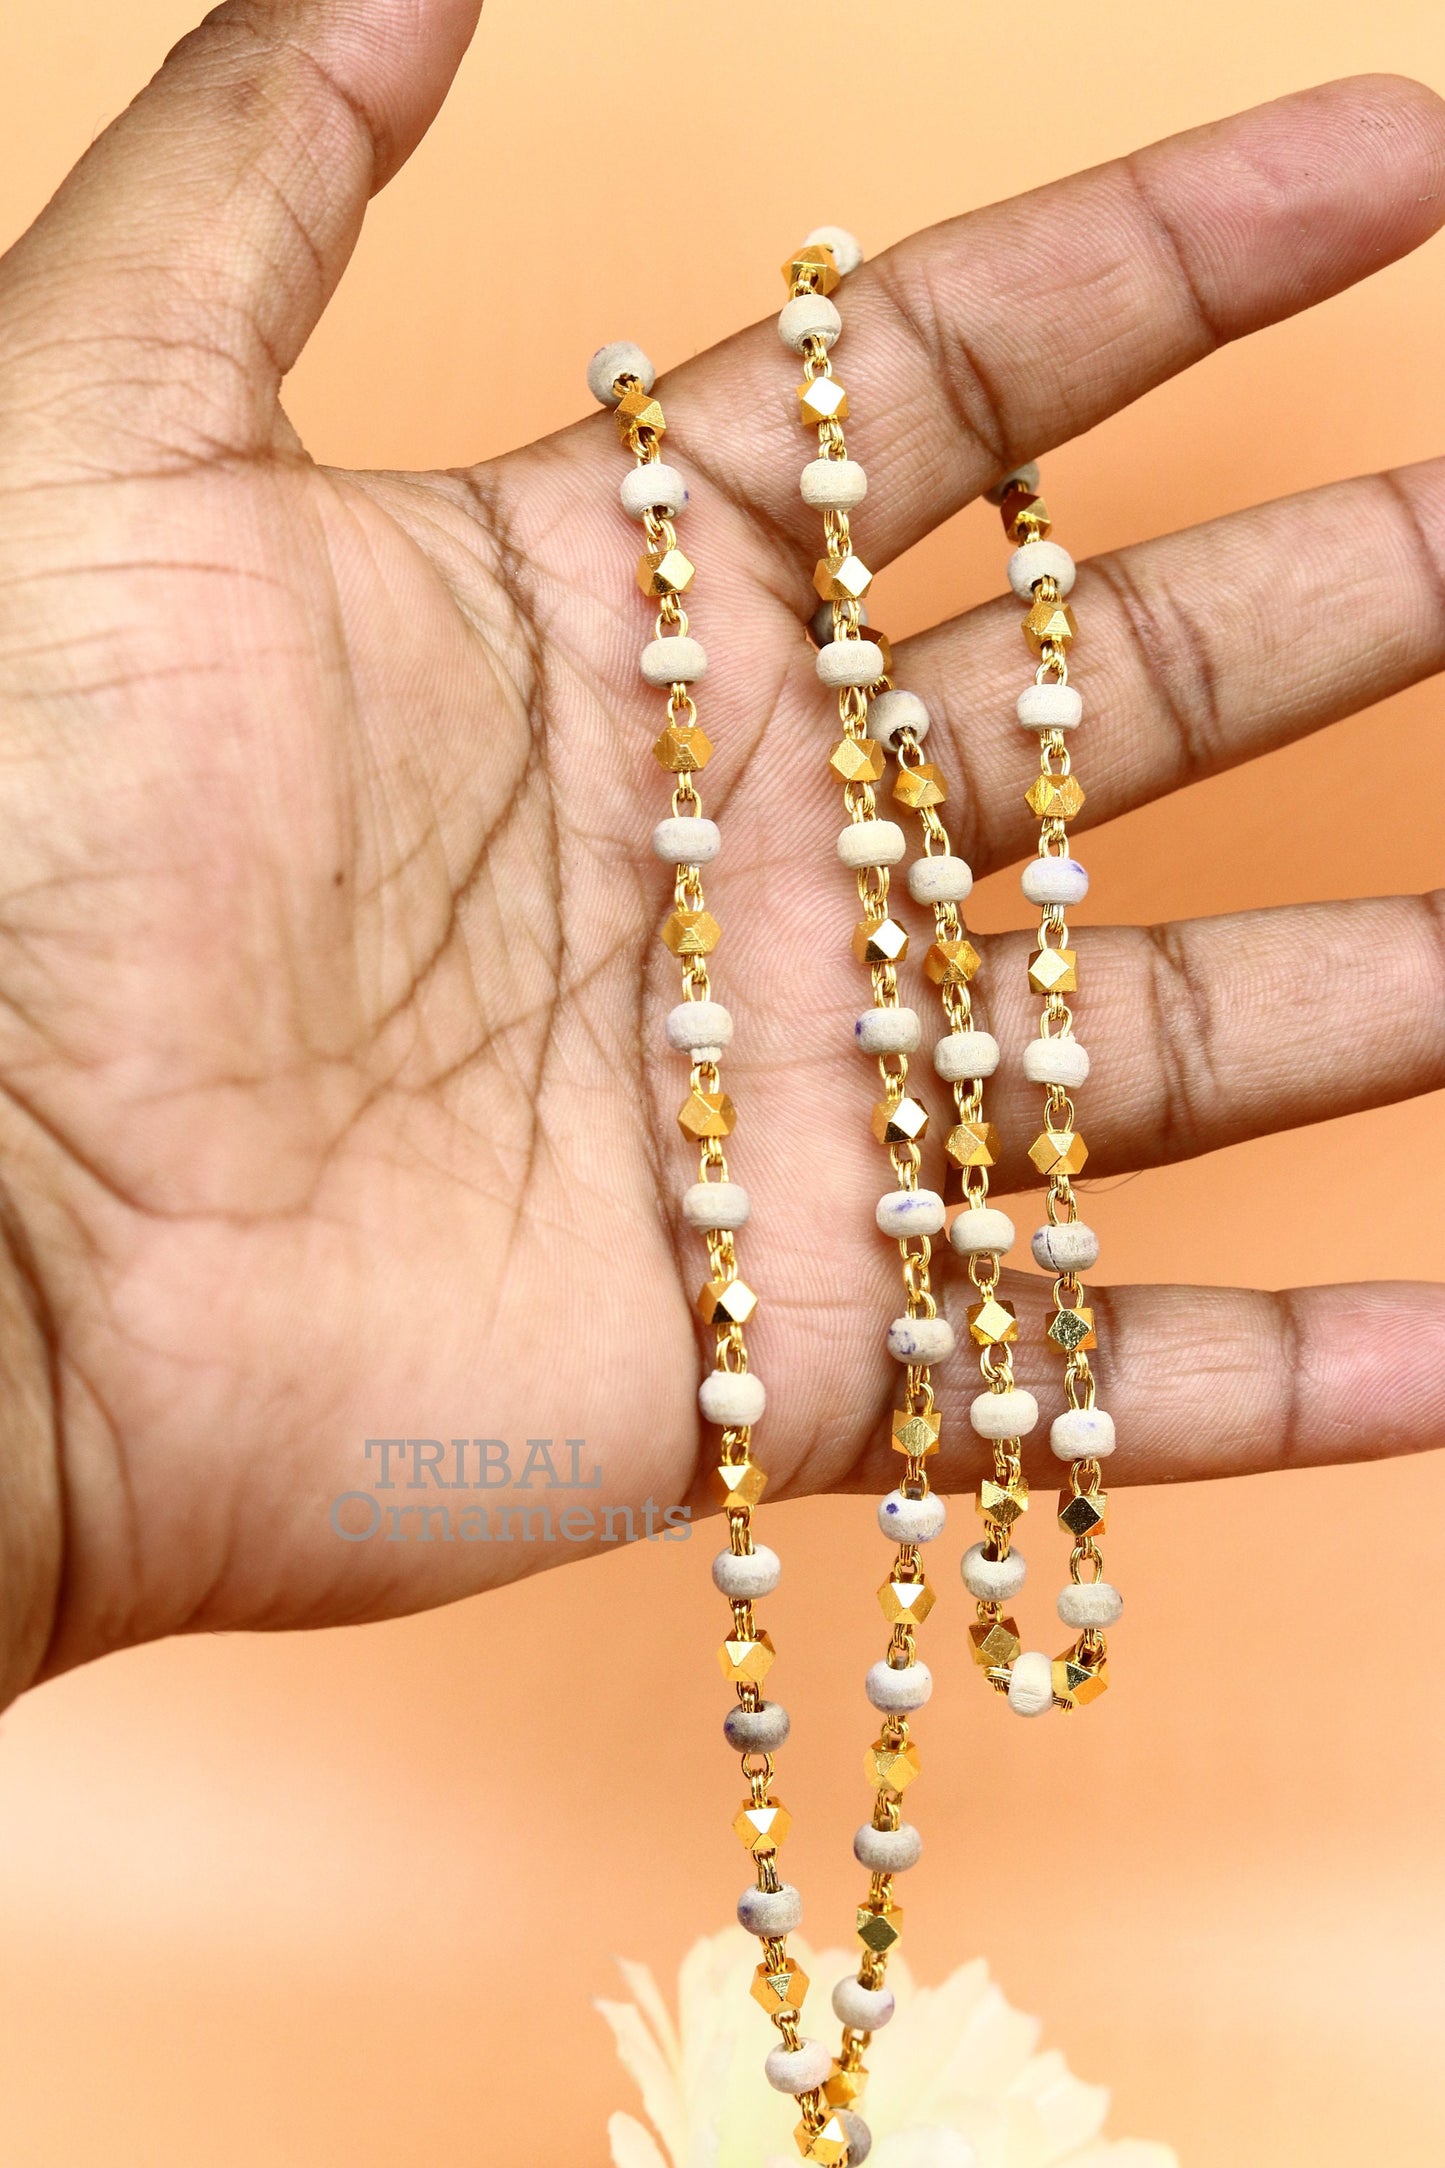 Sterling silver handmade wooden beads basil rosary beads silver chain over gold polished necklace, tulsi mala customized necklace ch160 - TRIBAL ORNAMENTS